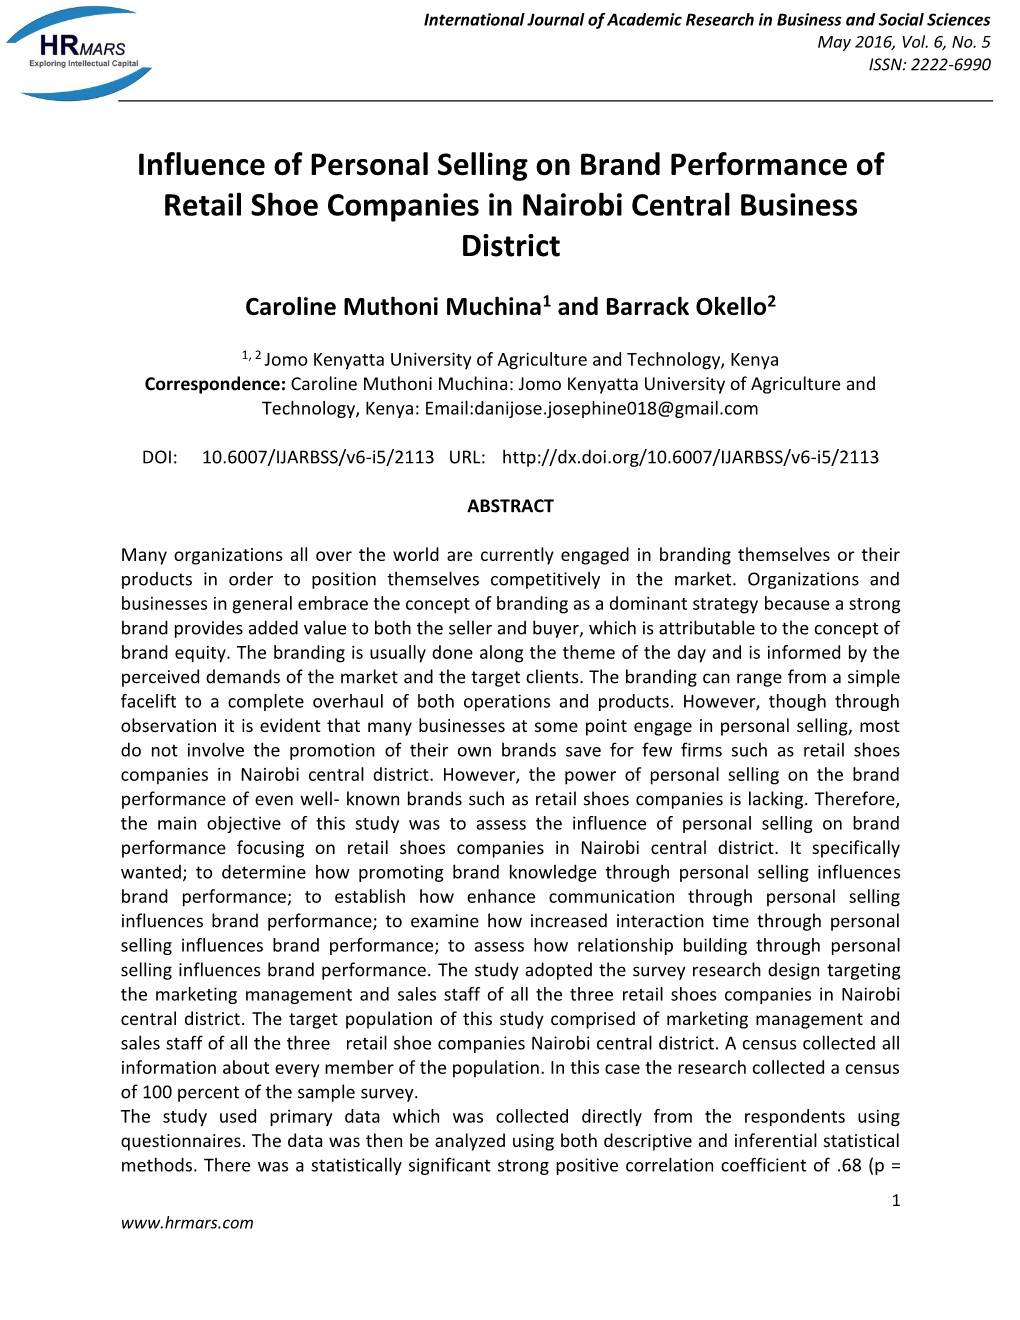 Influence of Personal Selling on Brand Performance of Retail Shoe Companies in Nairobi Central Business District